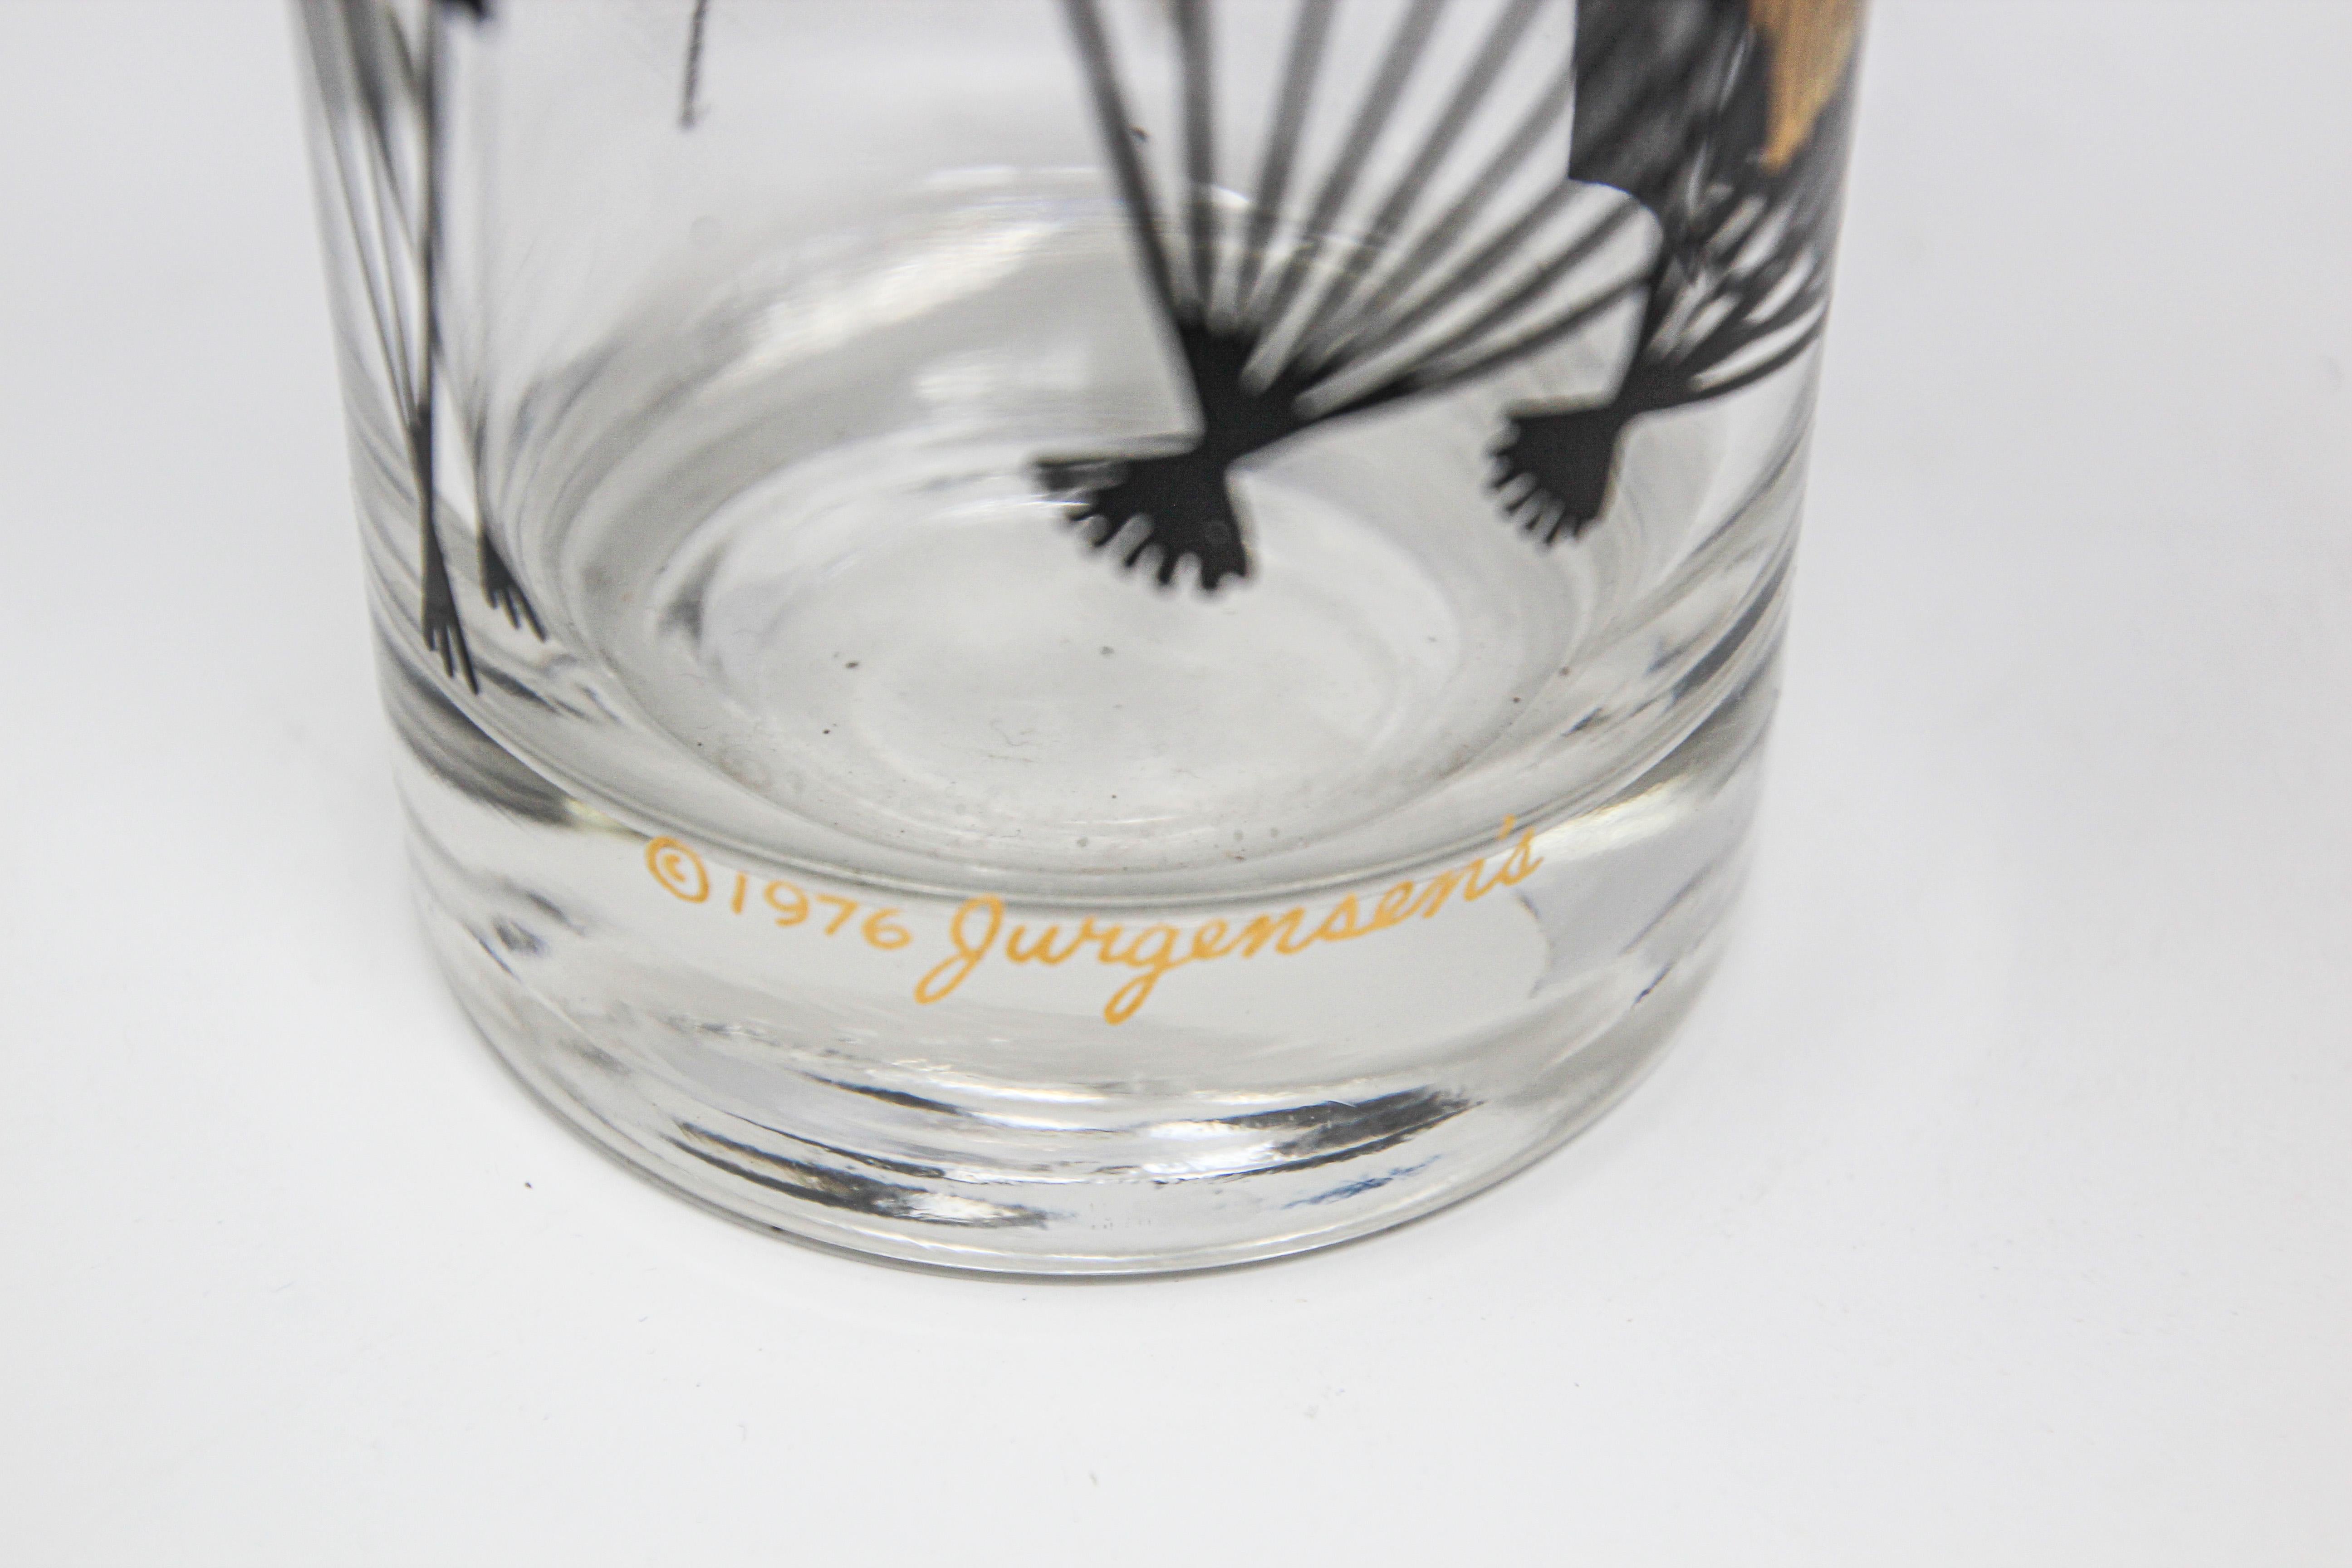 1976 Collectible Highball Glasses Black and Gold by Gurgensen's Set of 6 For Sale 6